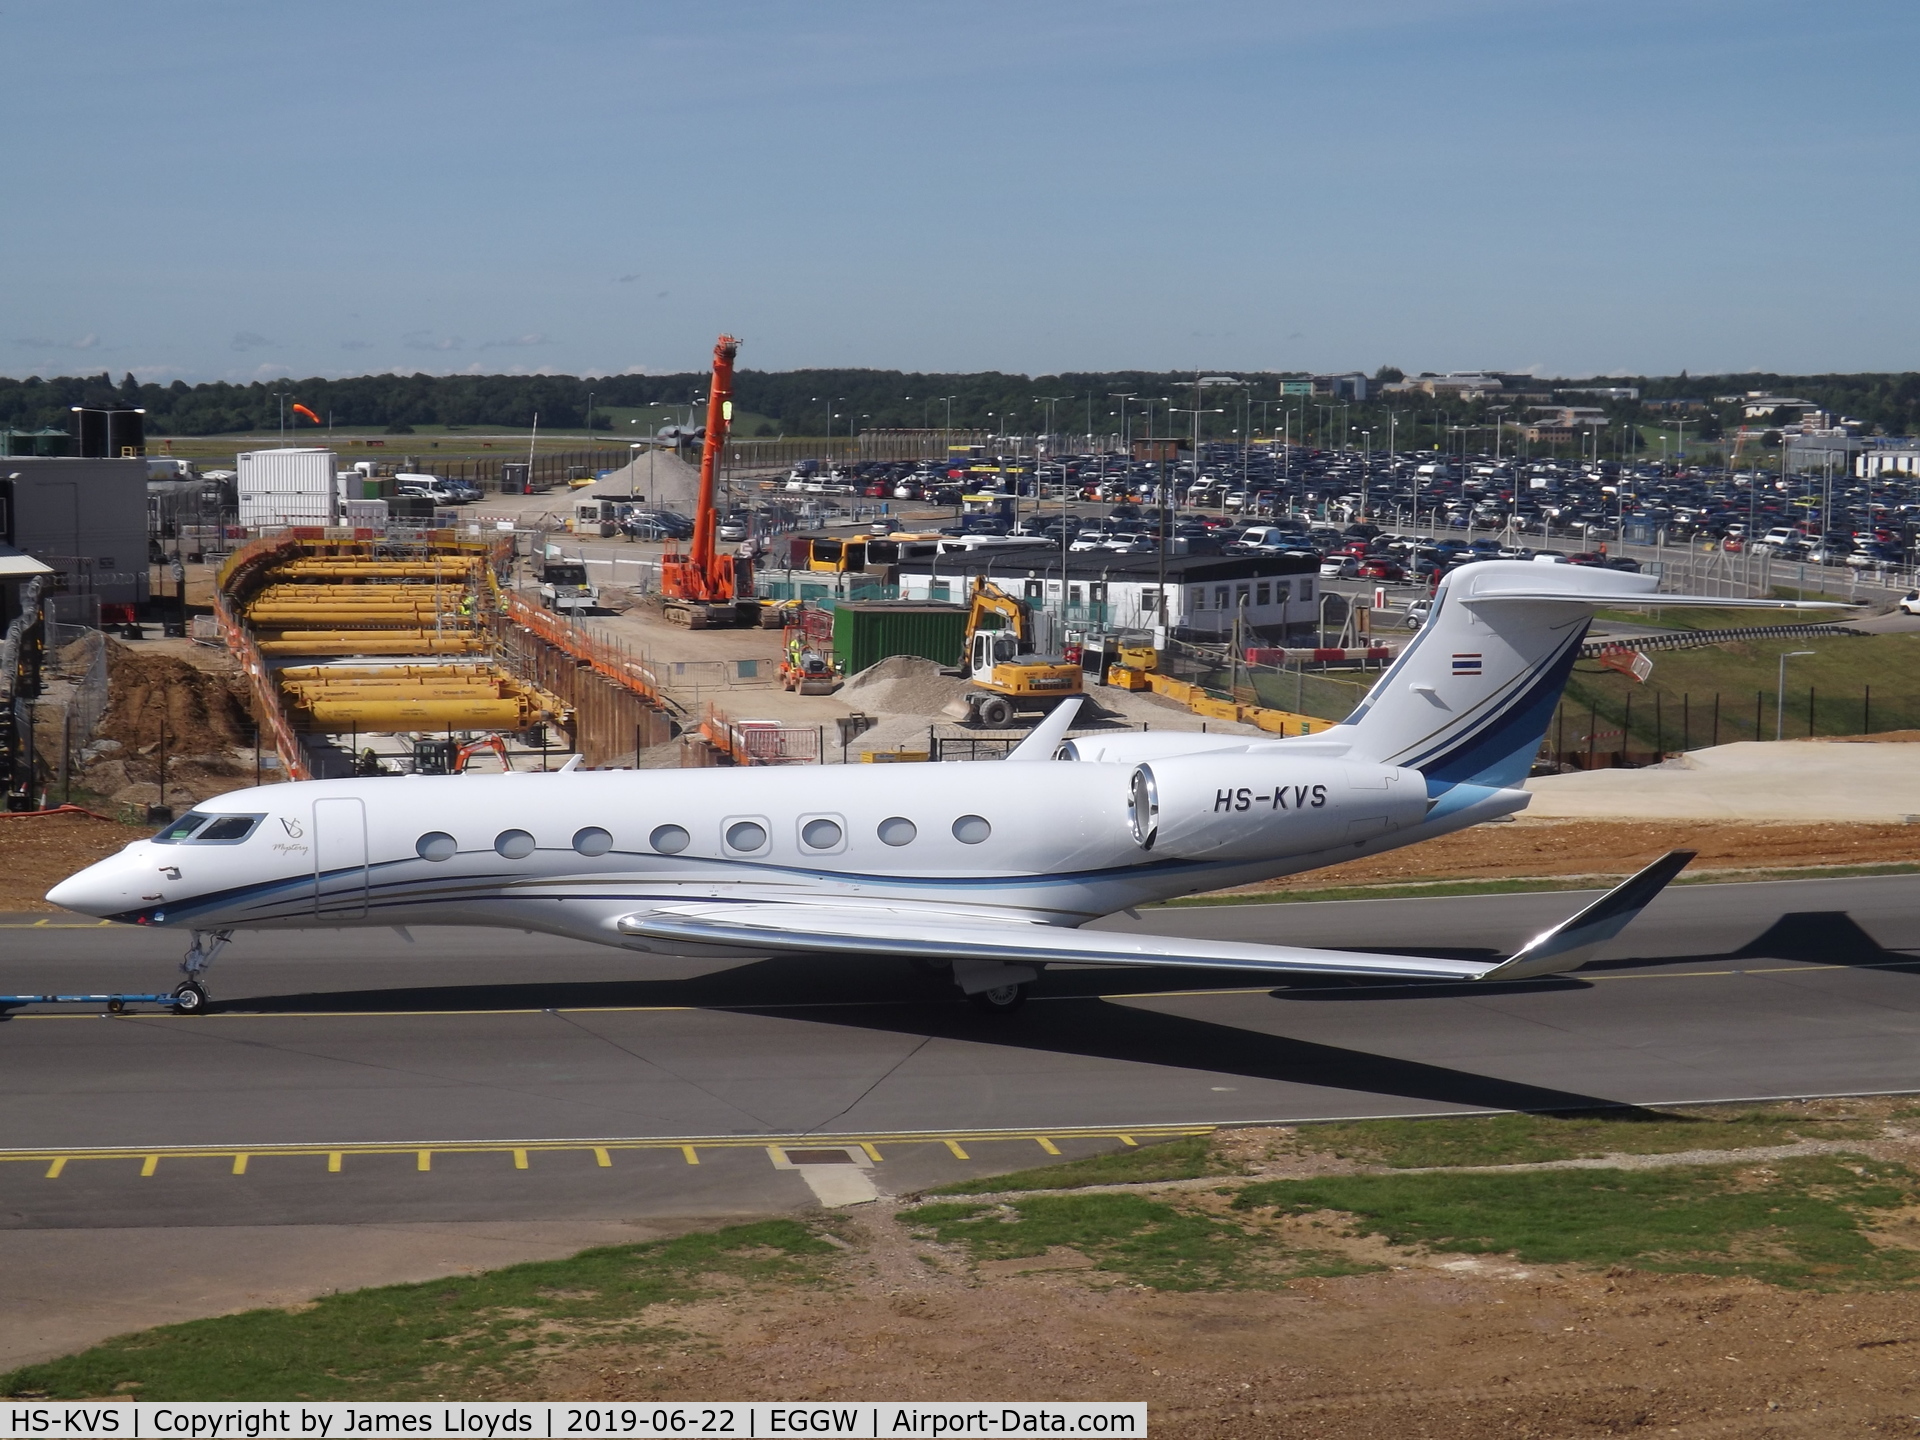 HS-KVS, 2019 Gulfstream G-VI (G650ER) C/N 6363, Seen at Luton Airport. The registration is believed to be in memory of the late Leicester City FC owner Khun Vichai Srivaddhanaprabha who was killed in his helicopter (G-VSKP) crash in October 2018.